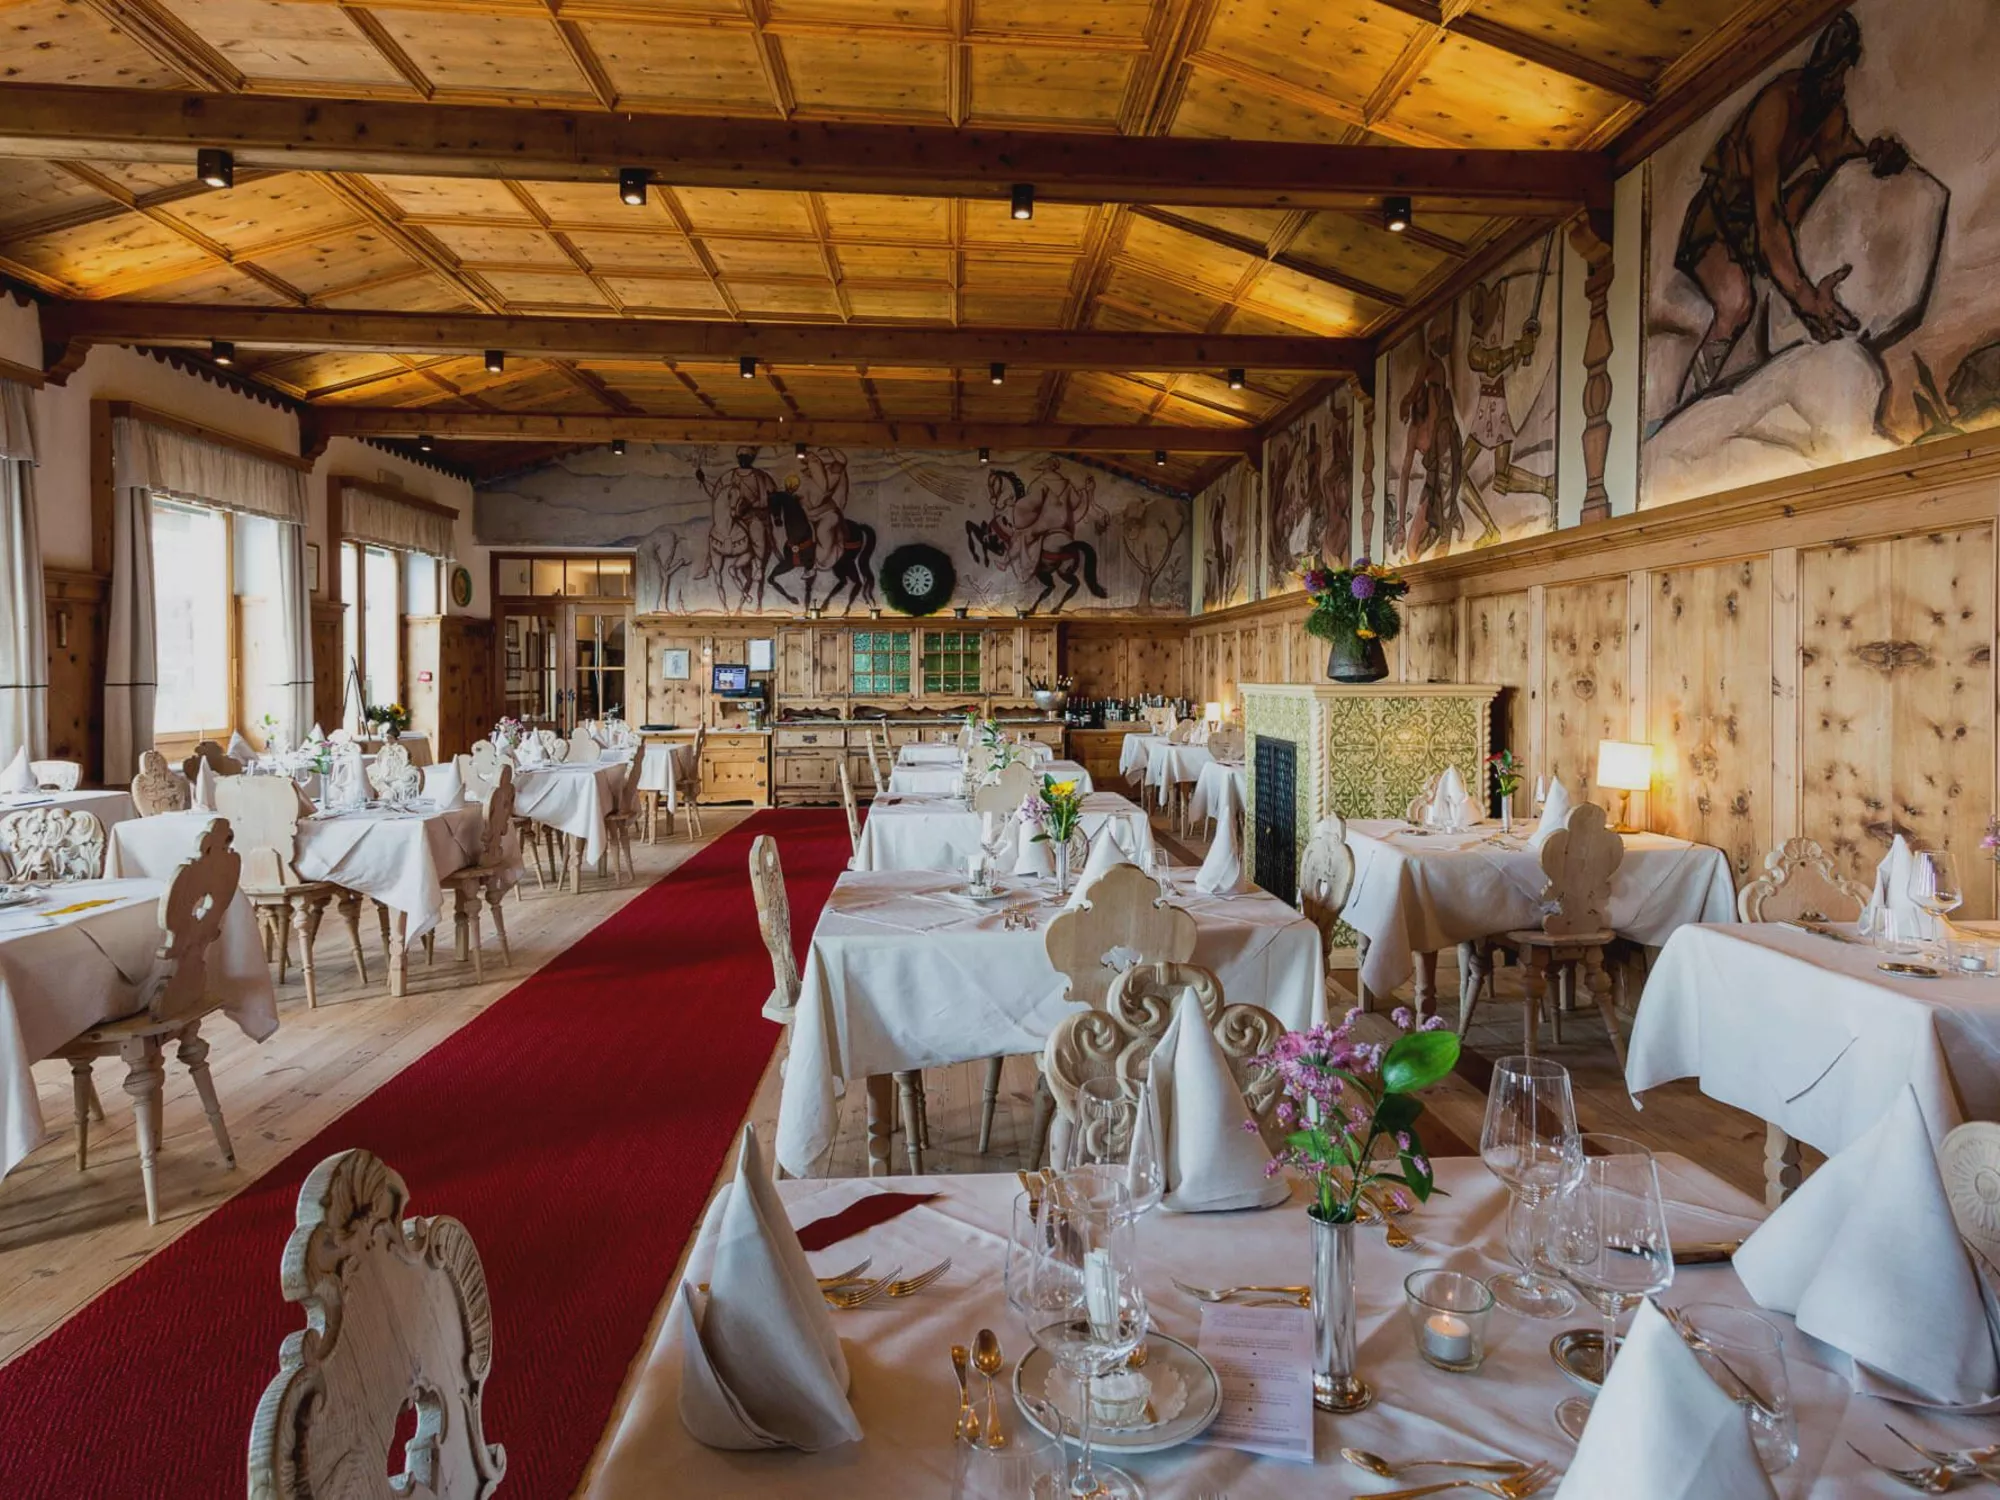 Riese Grimm dining room with wall fresco and festively set tables in the historic restaurant of Hotel Der Zirmerhof in Radein, South Tyrol.